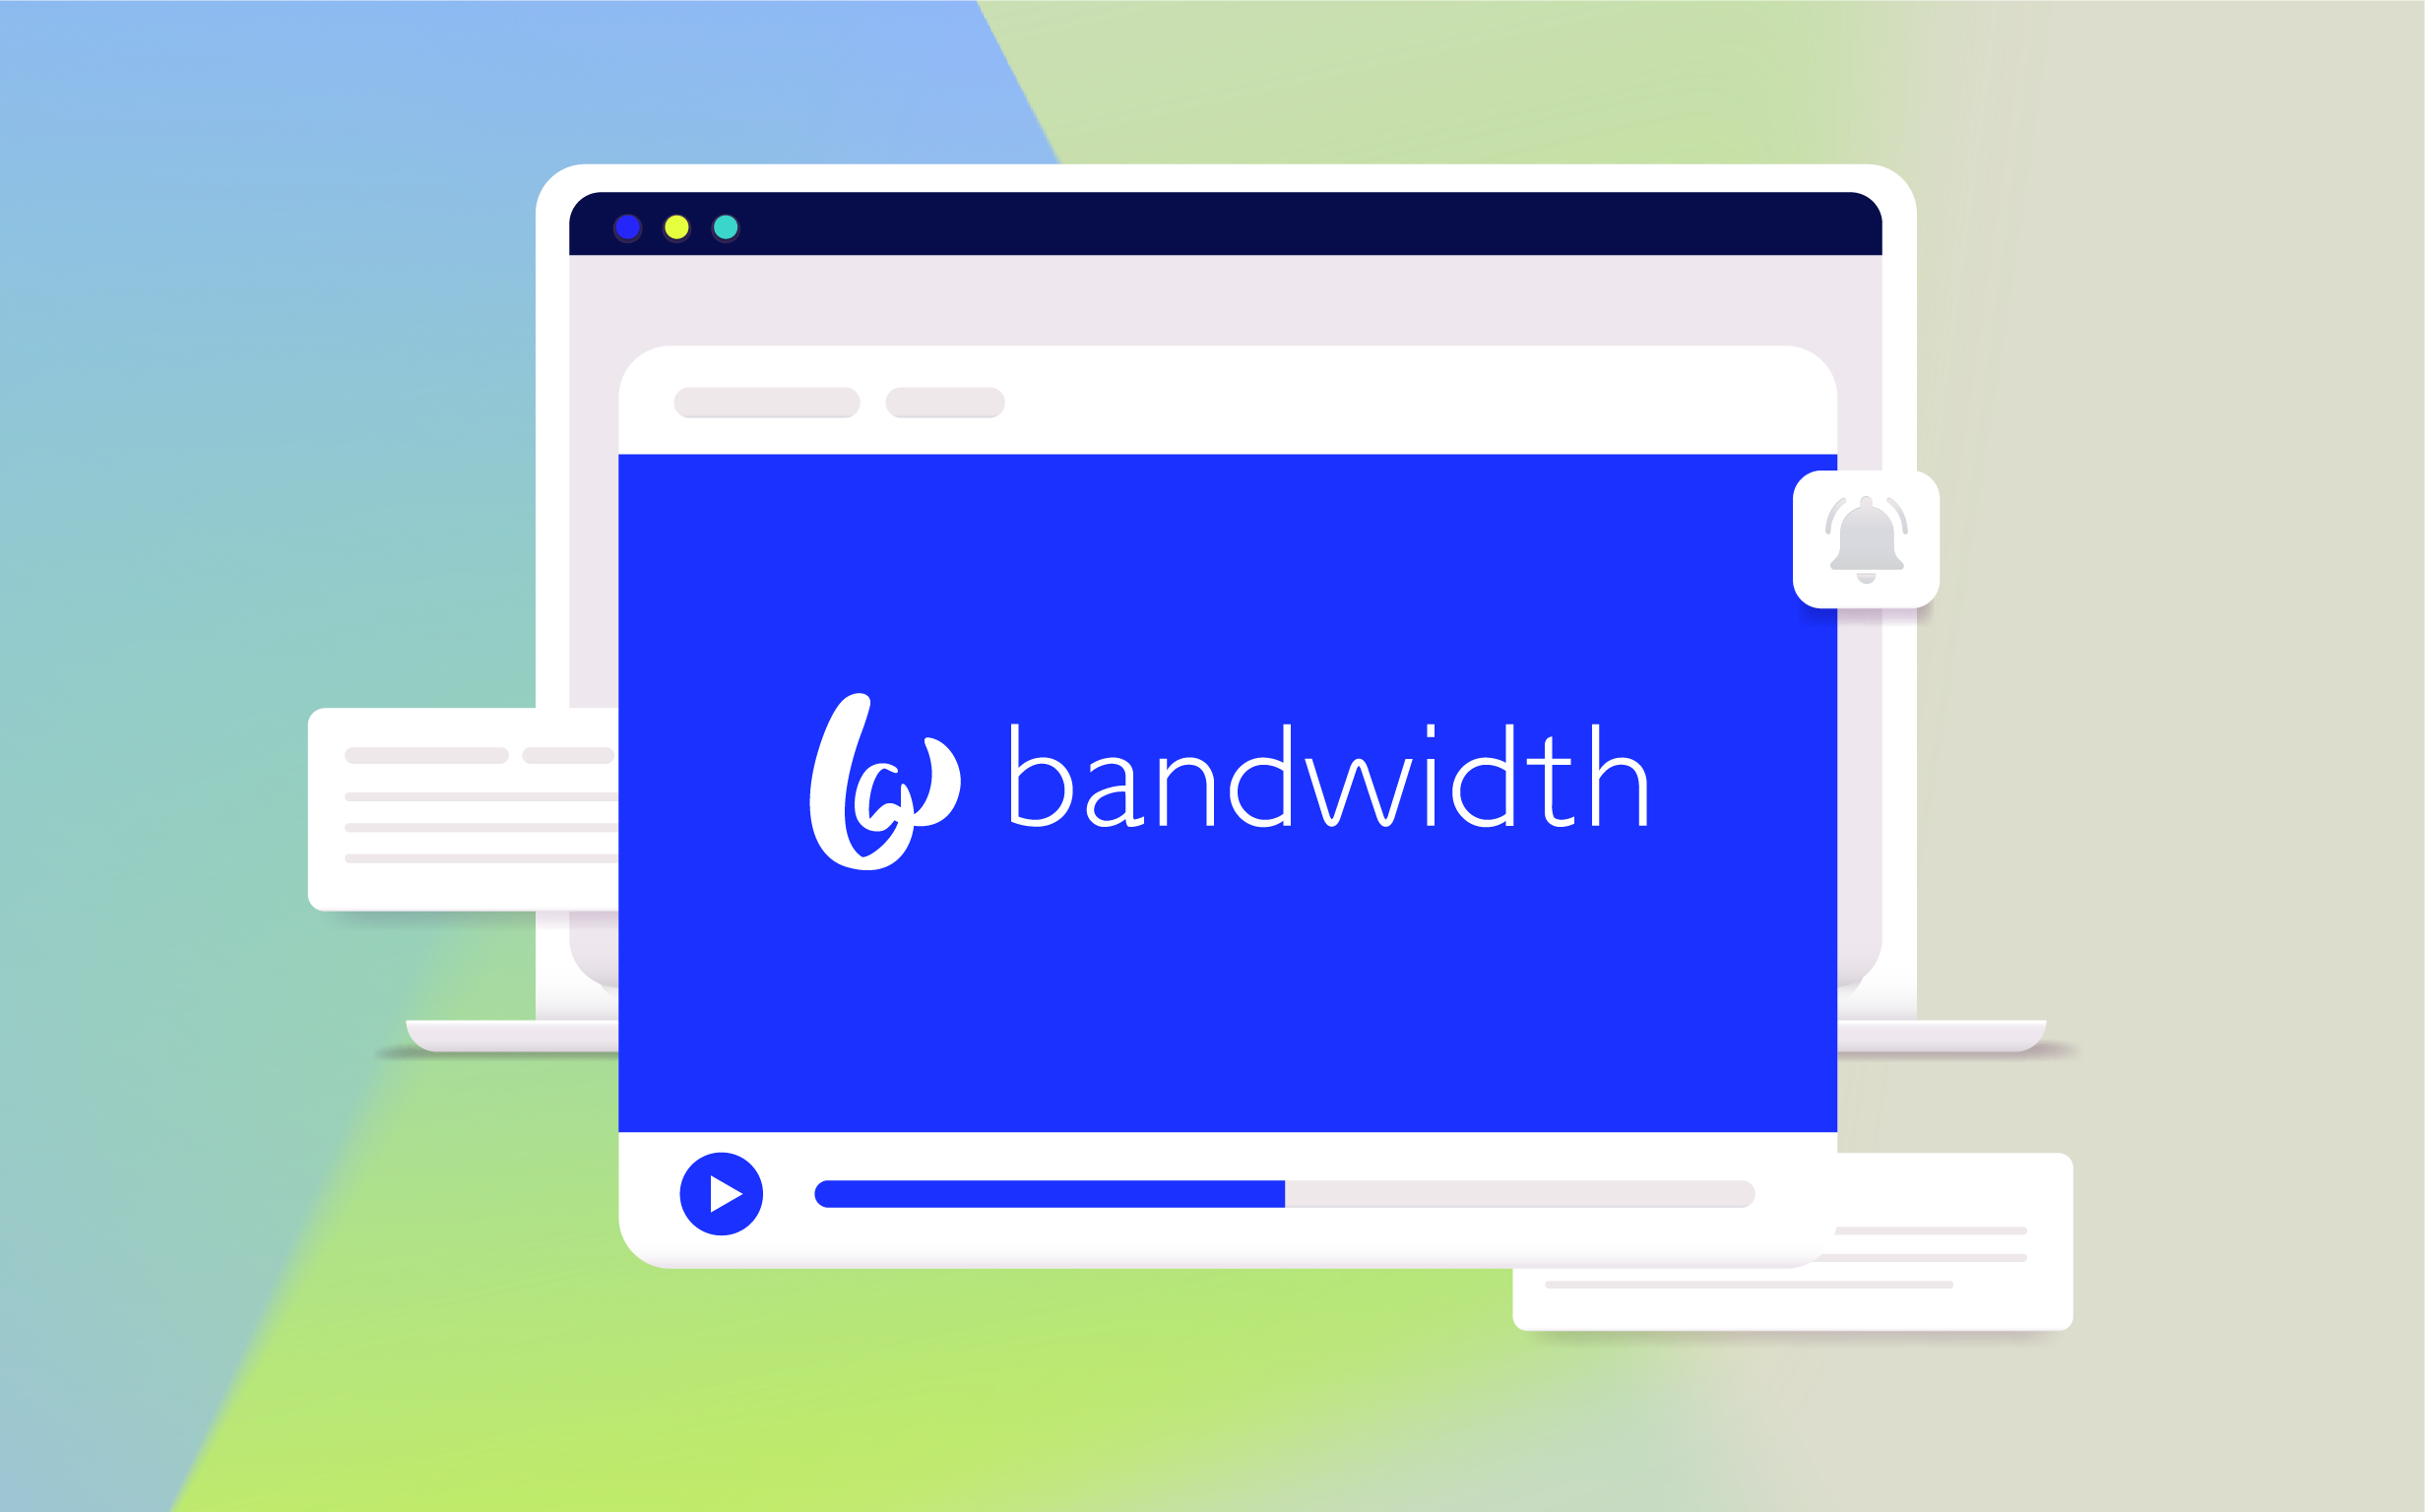 Bandwidth makes strides with operational efficiency